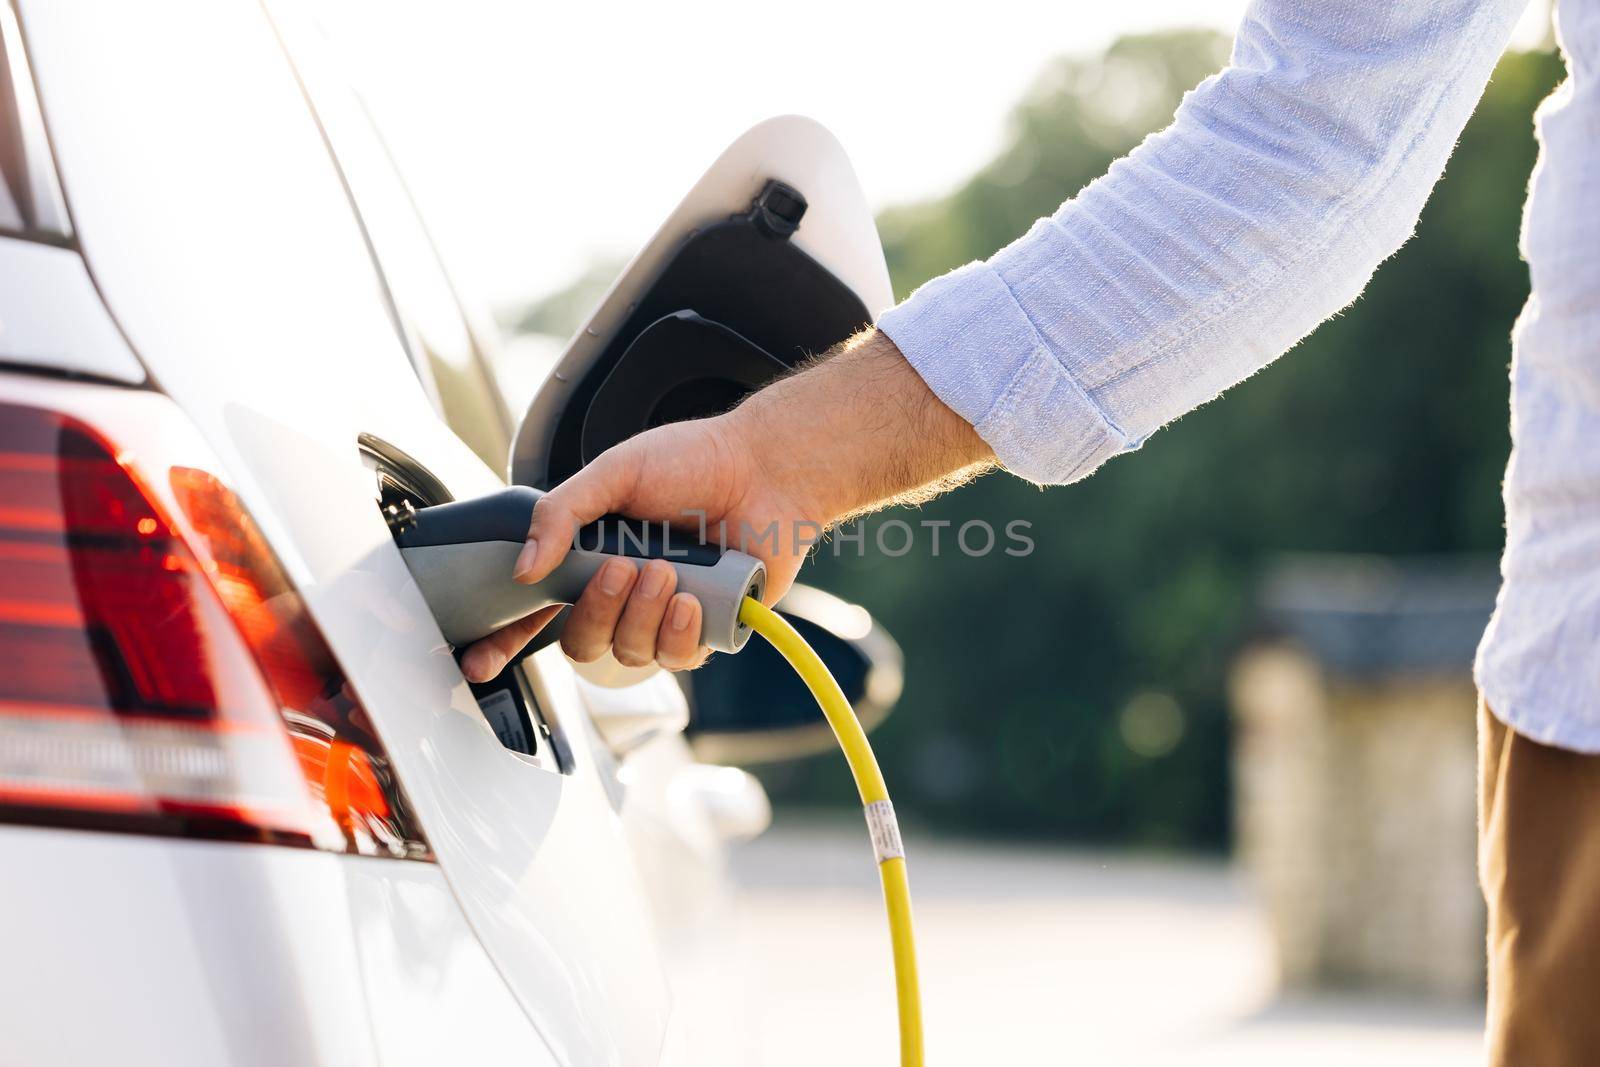 The driver of the electric car inserts the electrical connector to charge the batteries. Unrecognizable man attaching power cable to electric car. Electric vehicle Recharging battery charging port.